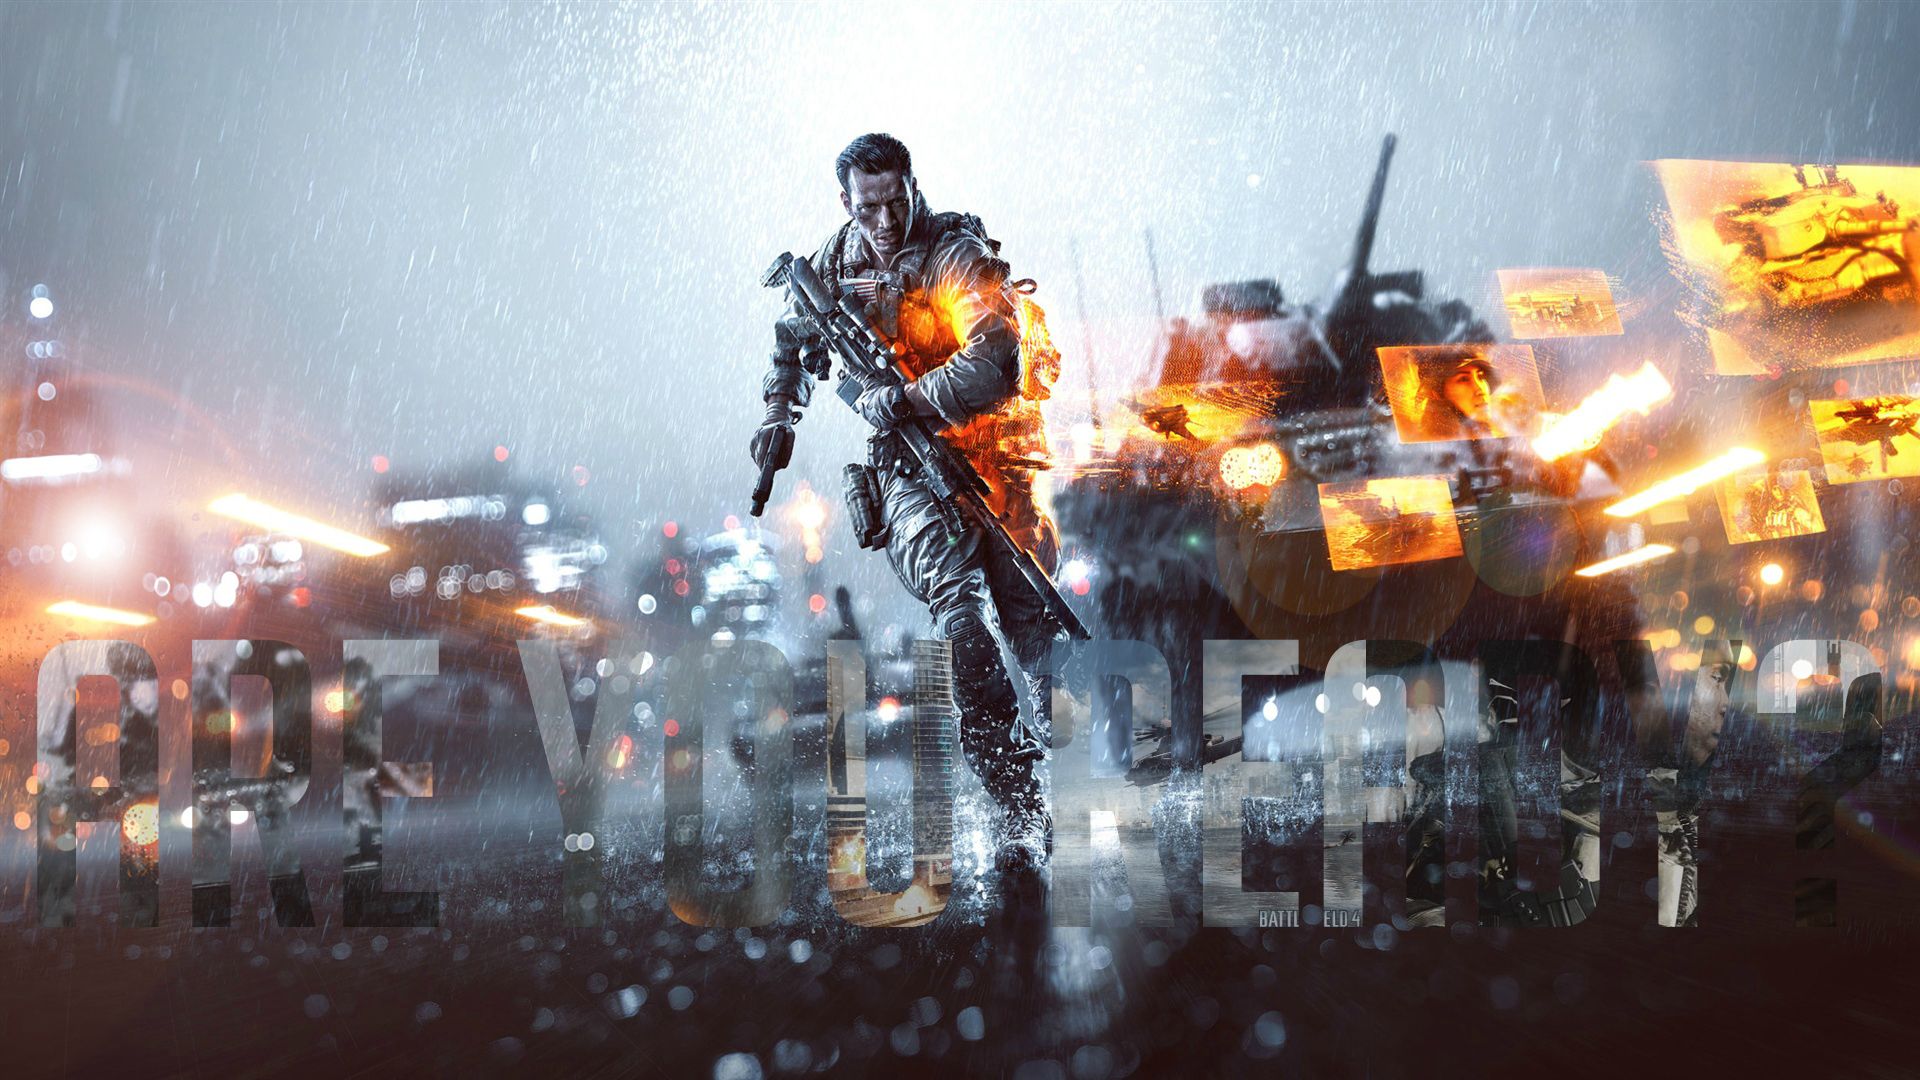 Made a New BF4 Wallpaper [1080P] x post from rbattlefield 4 1920x1080